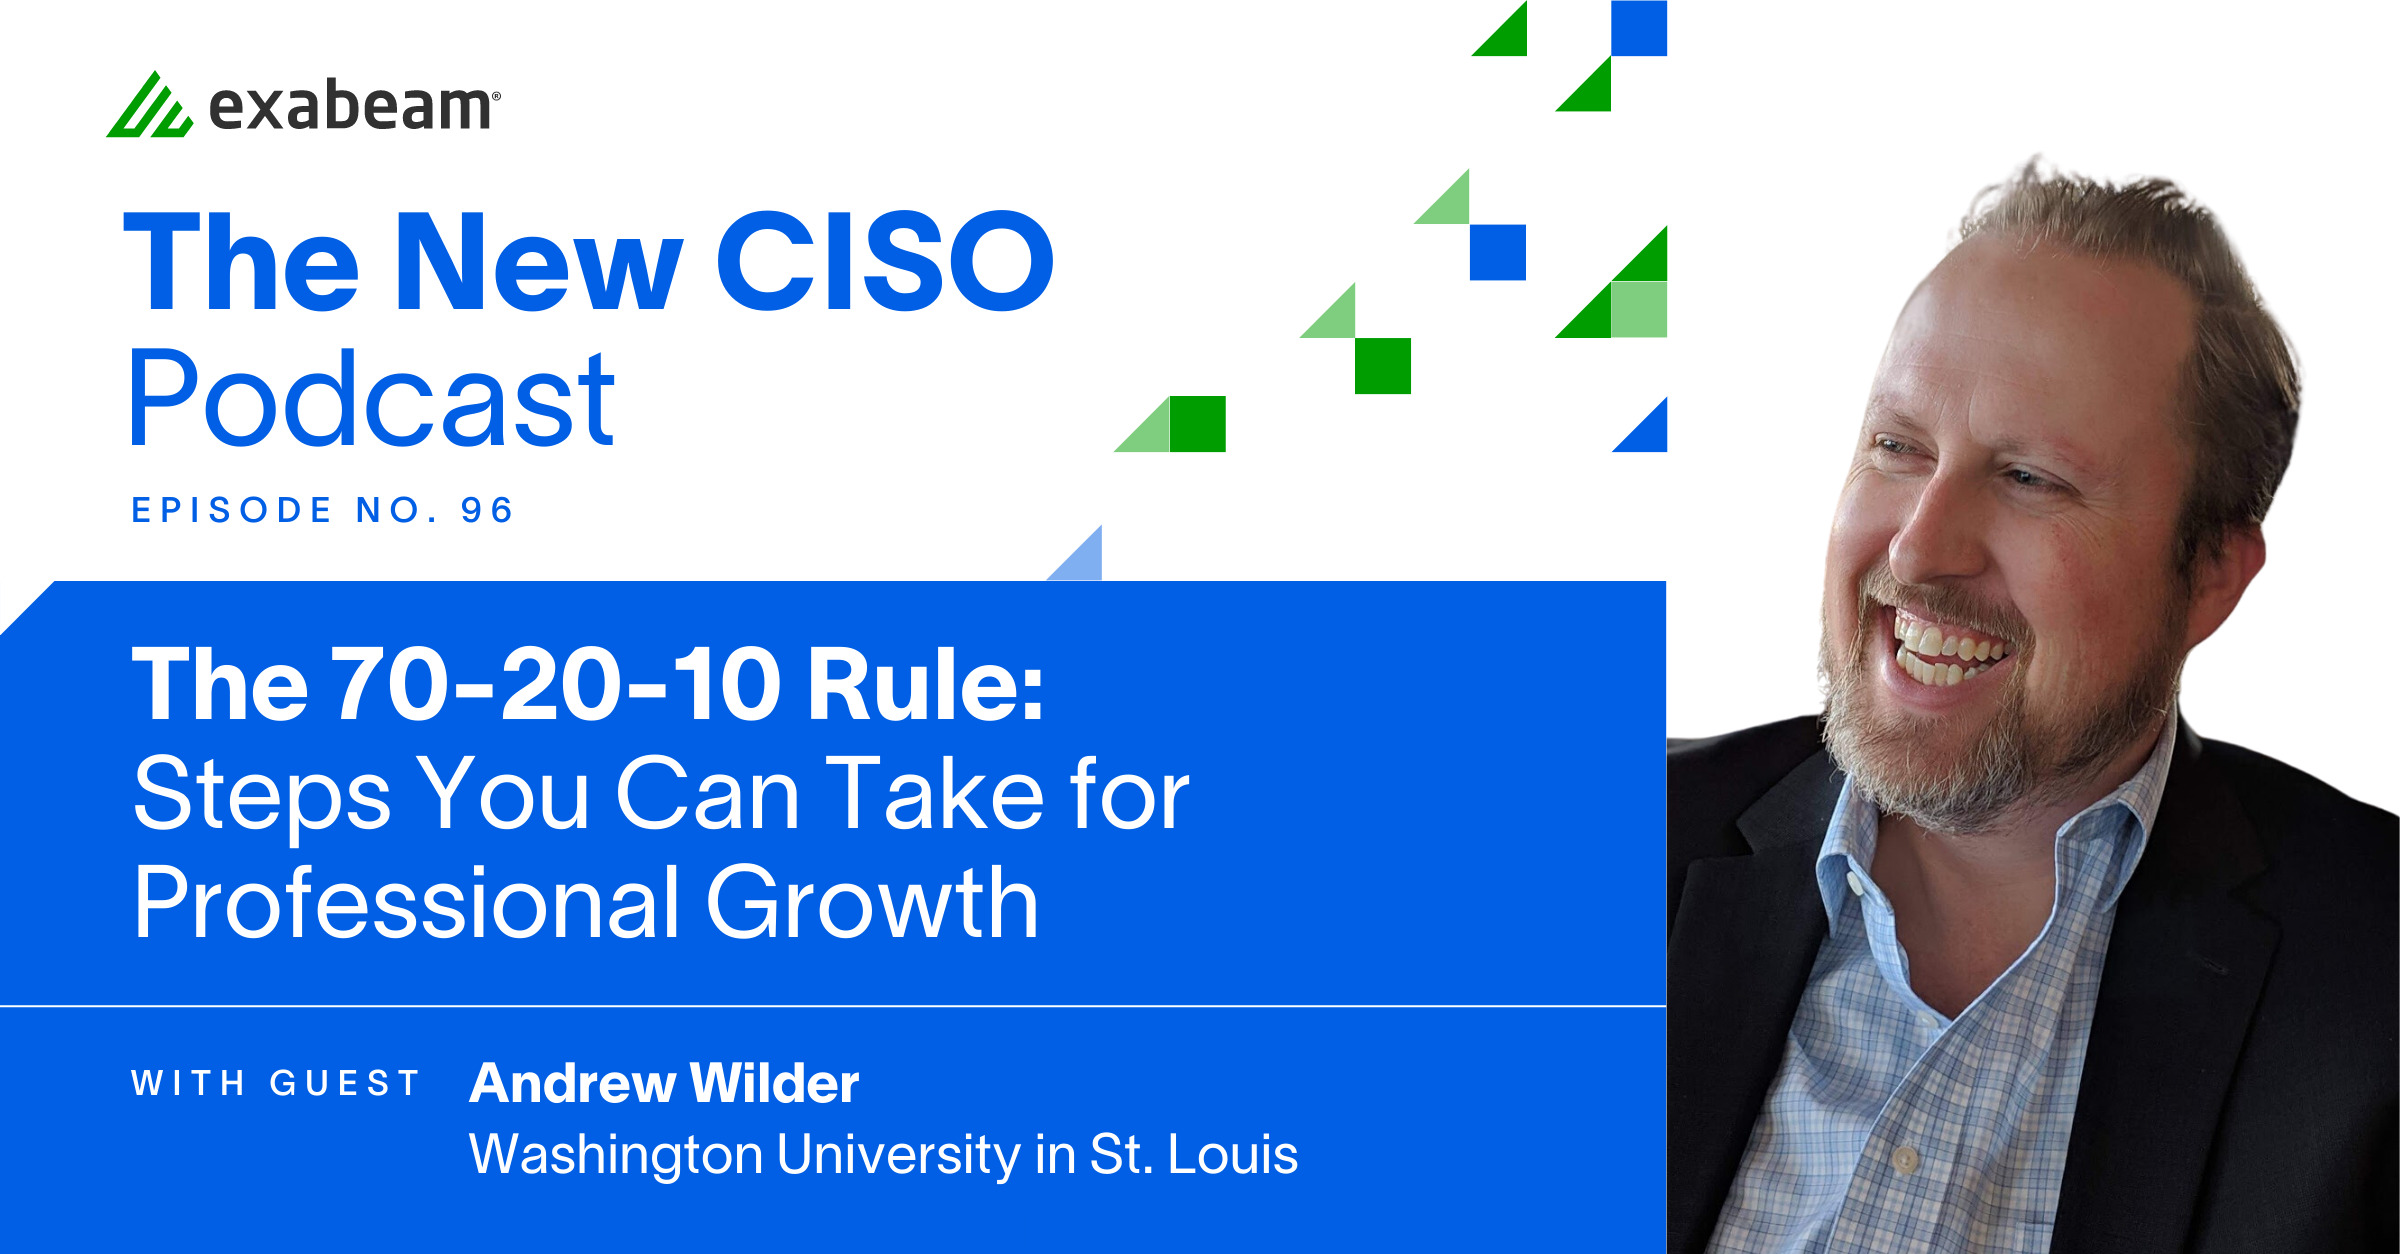 The New CISO Podcast Episode 96: The 70-20-10 Rule - Steps You Can Take for Professional Growth